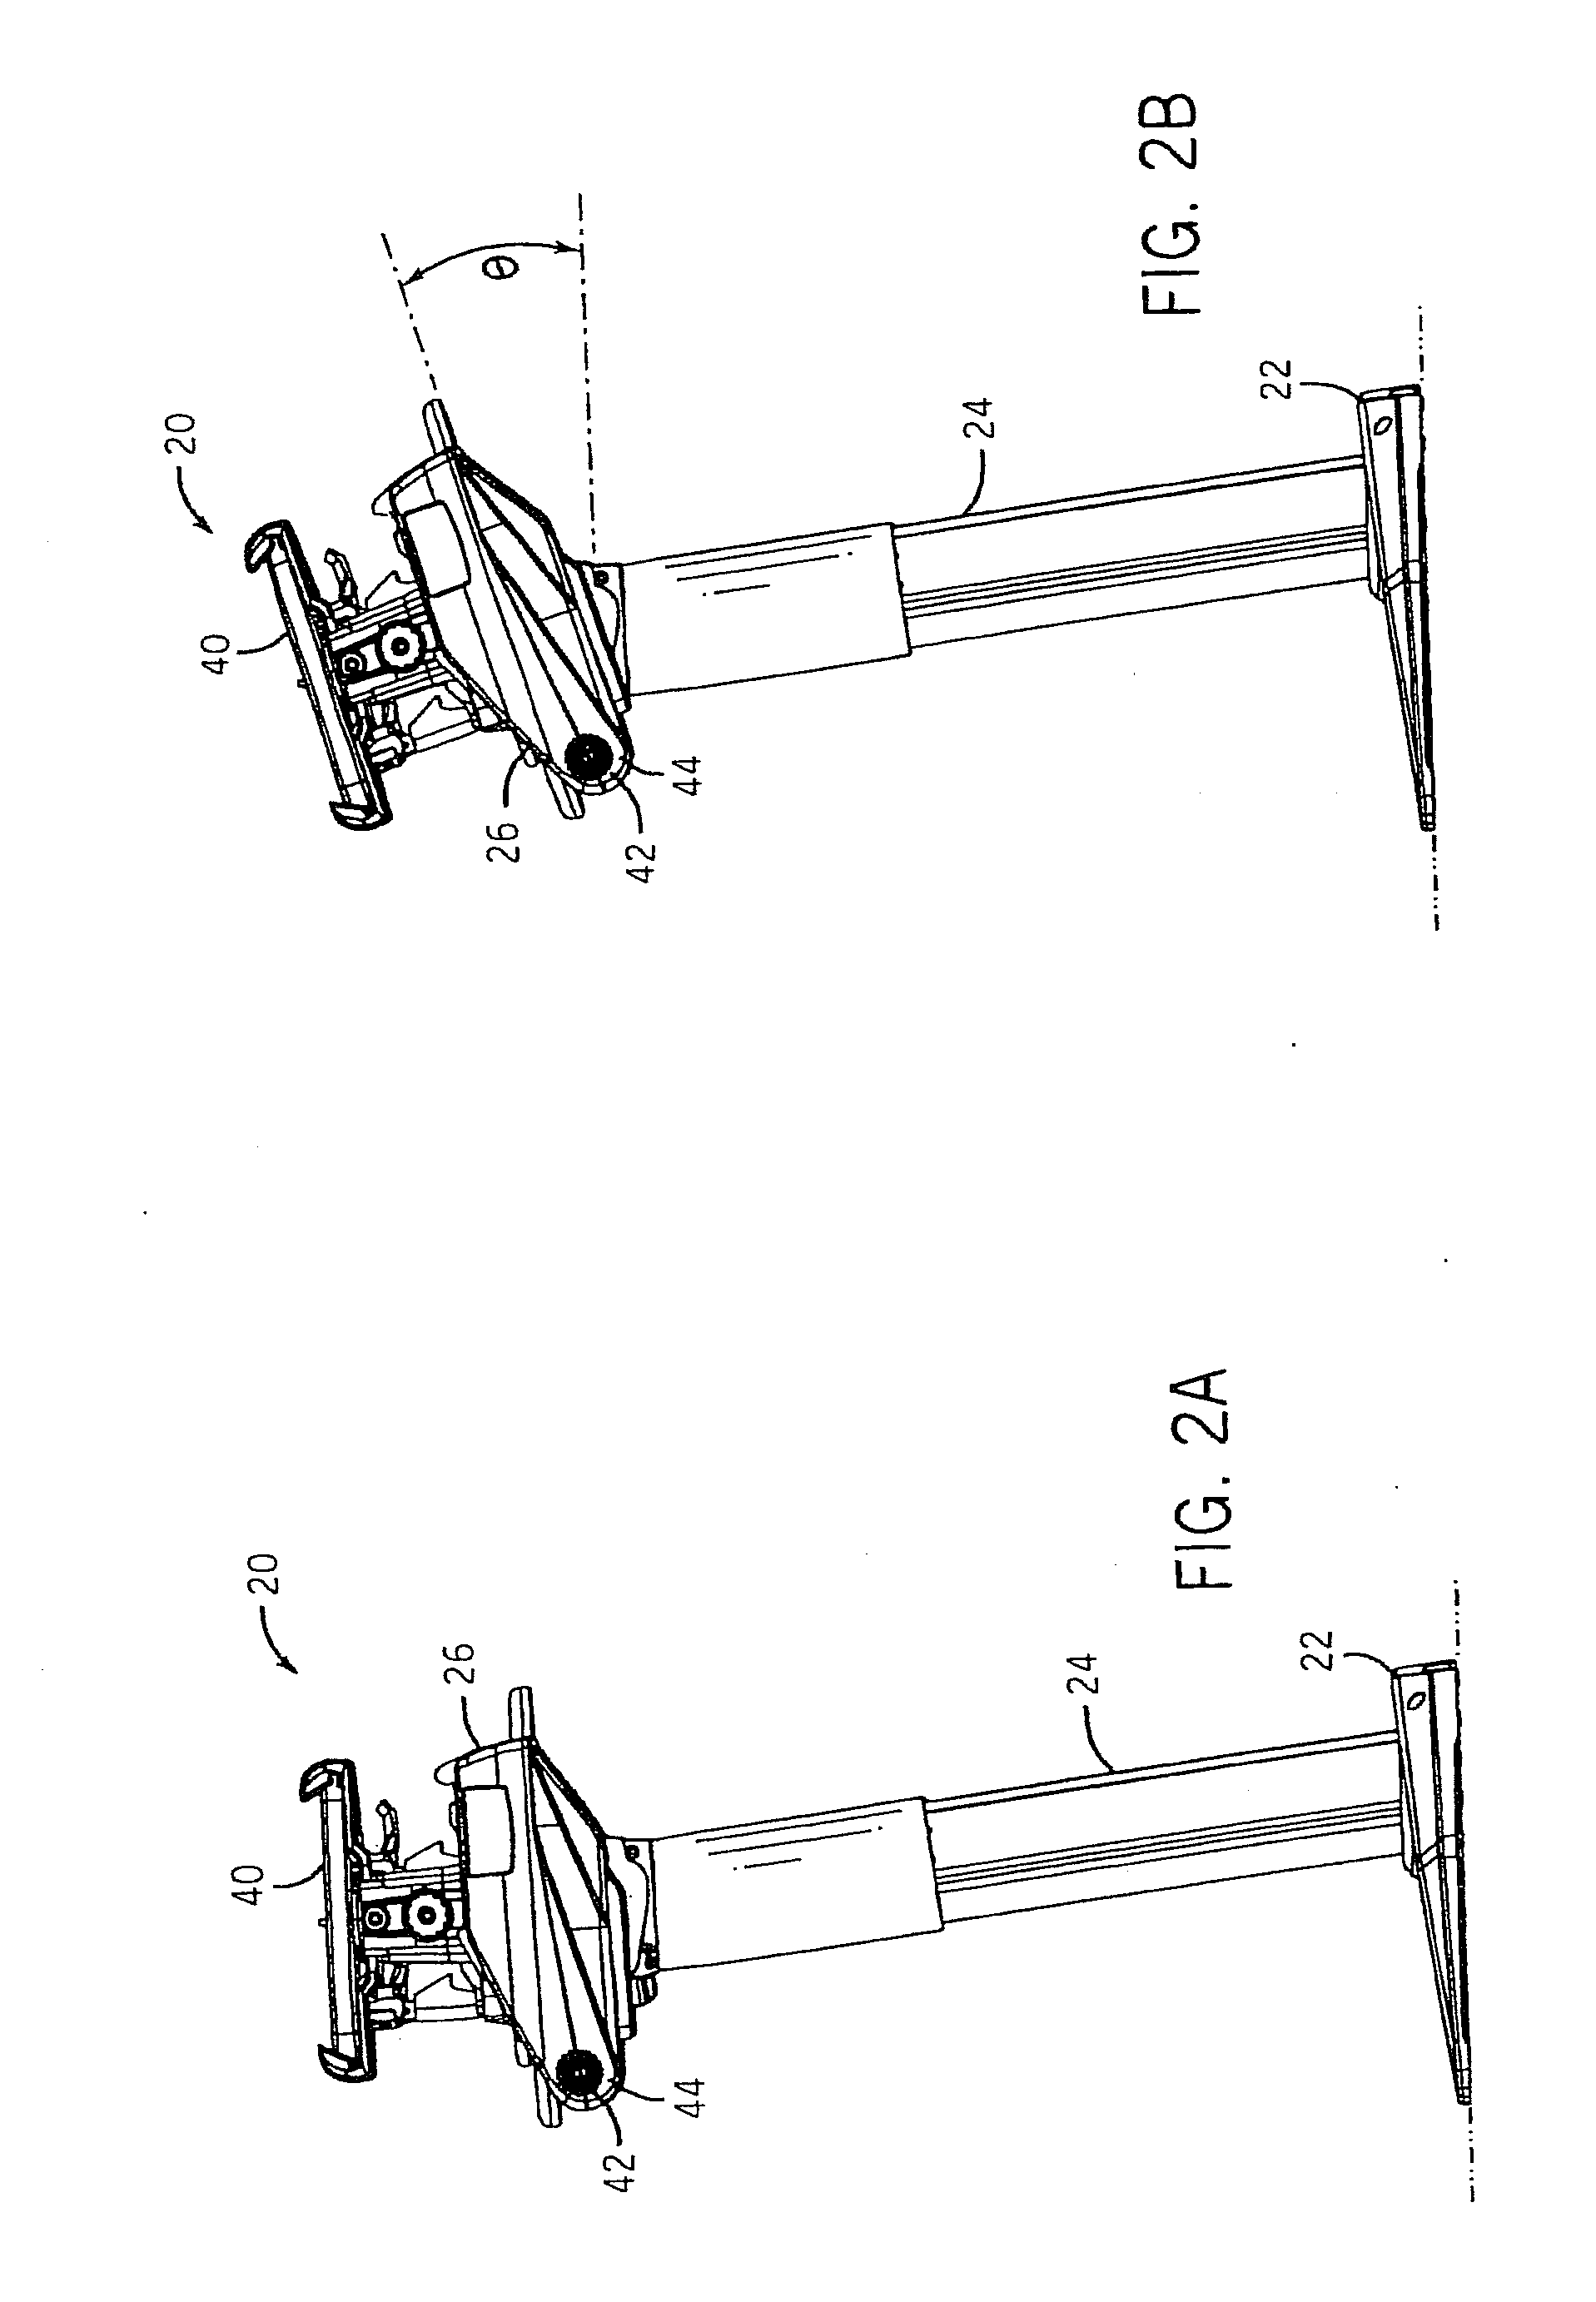 Customized racquet stringing system and method